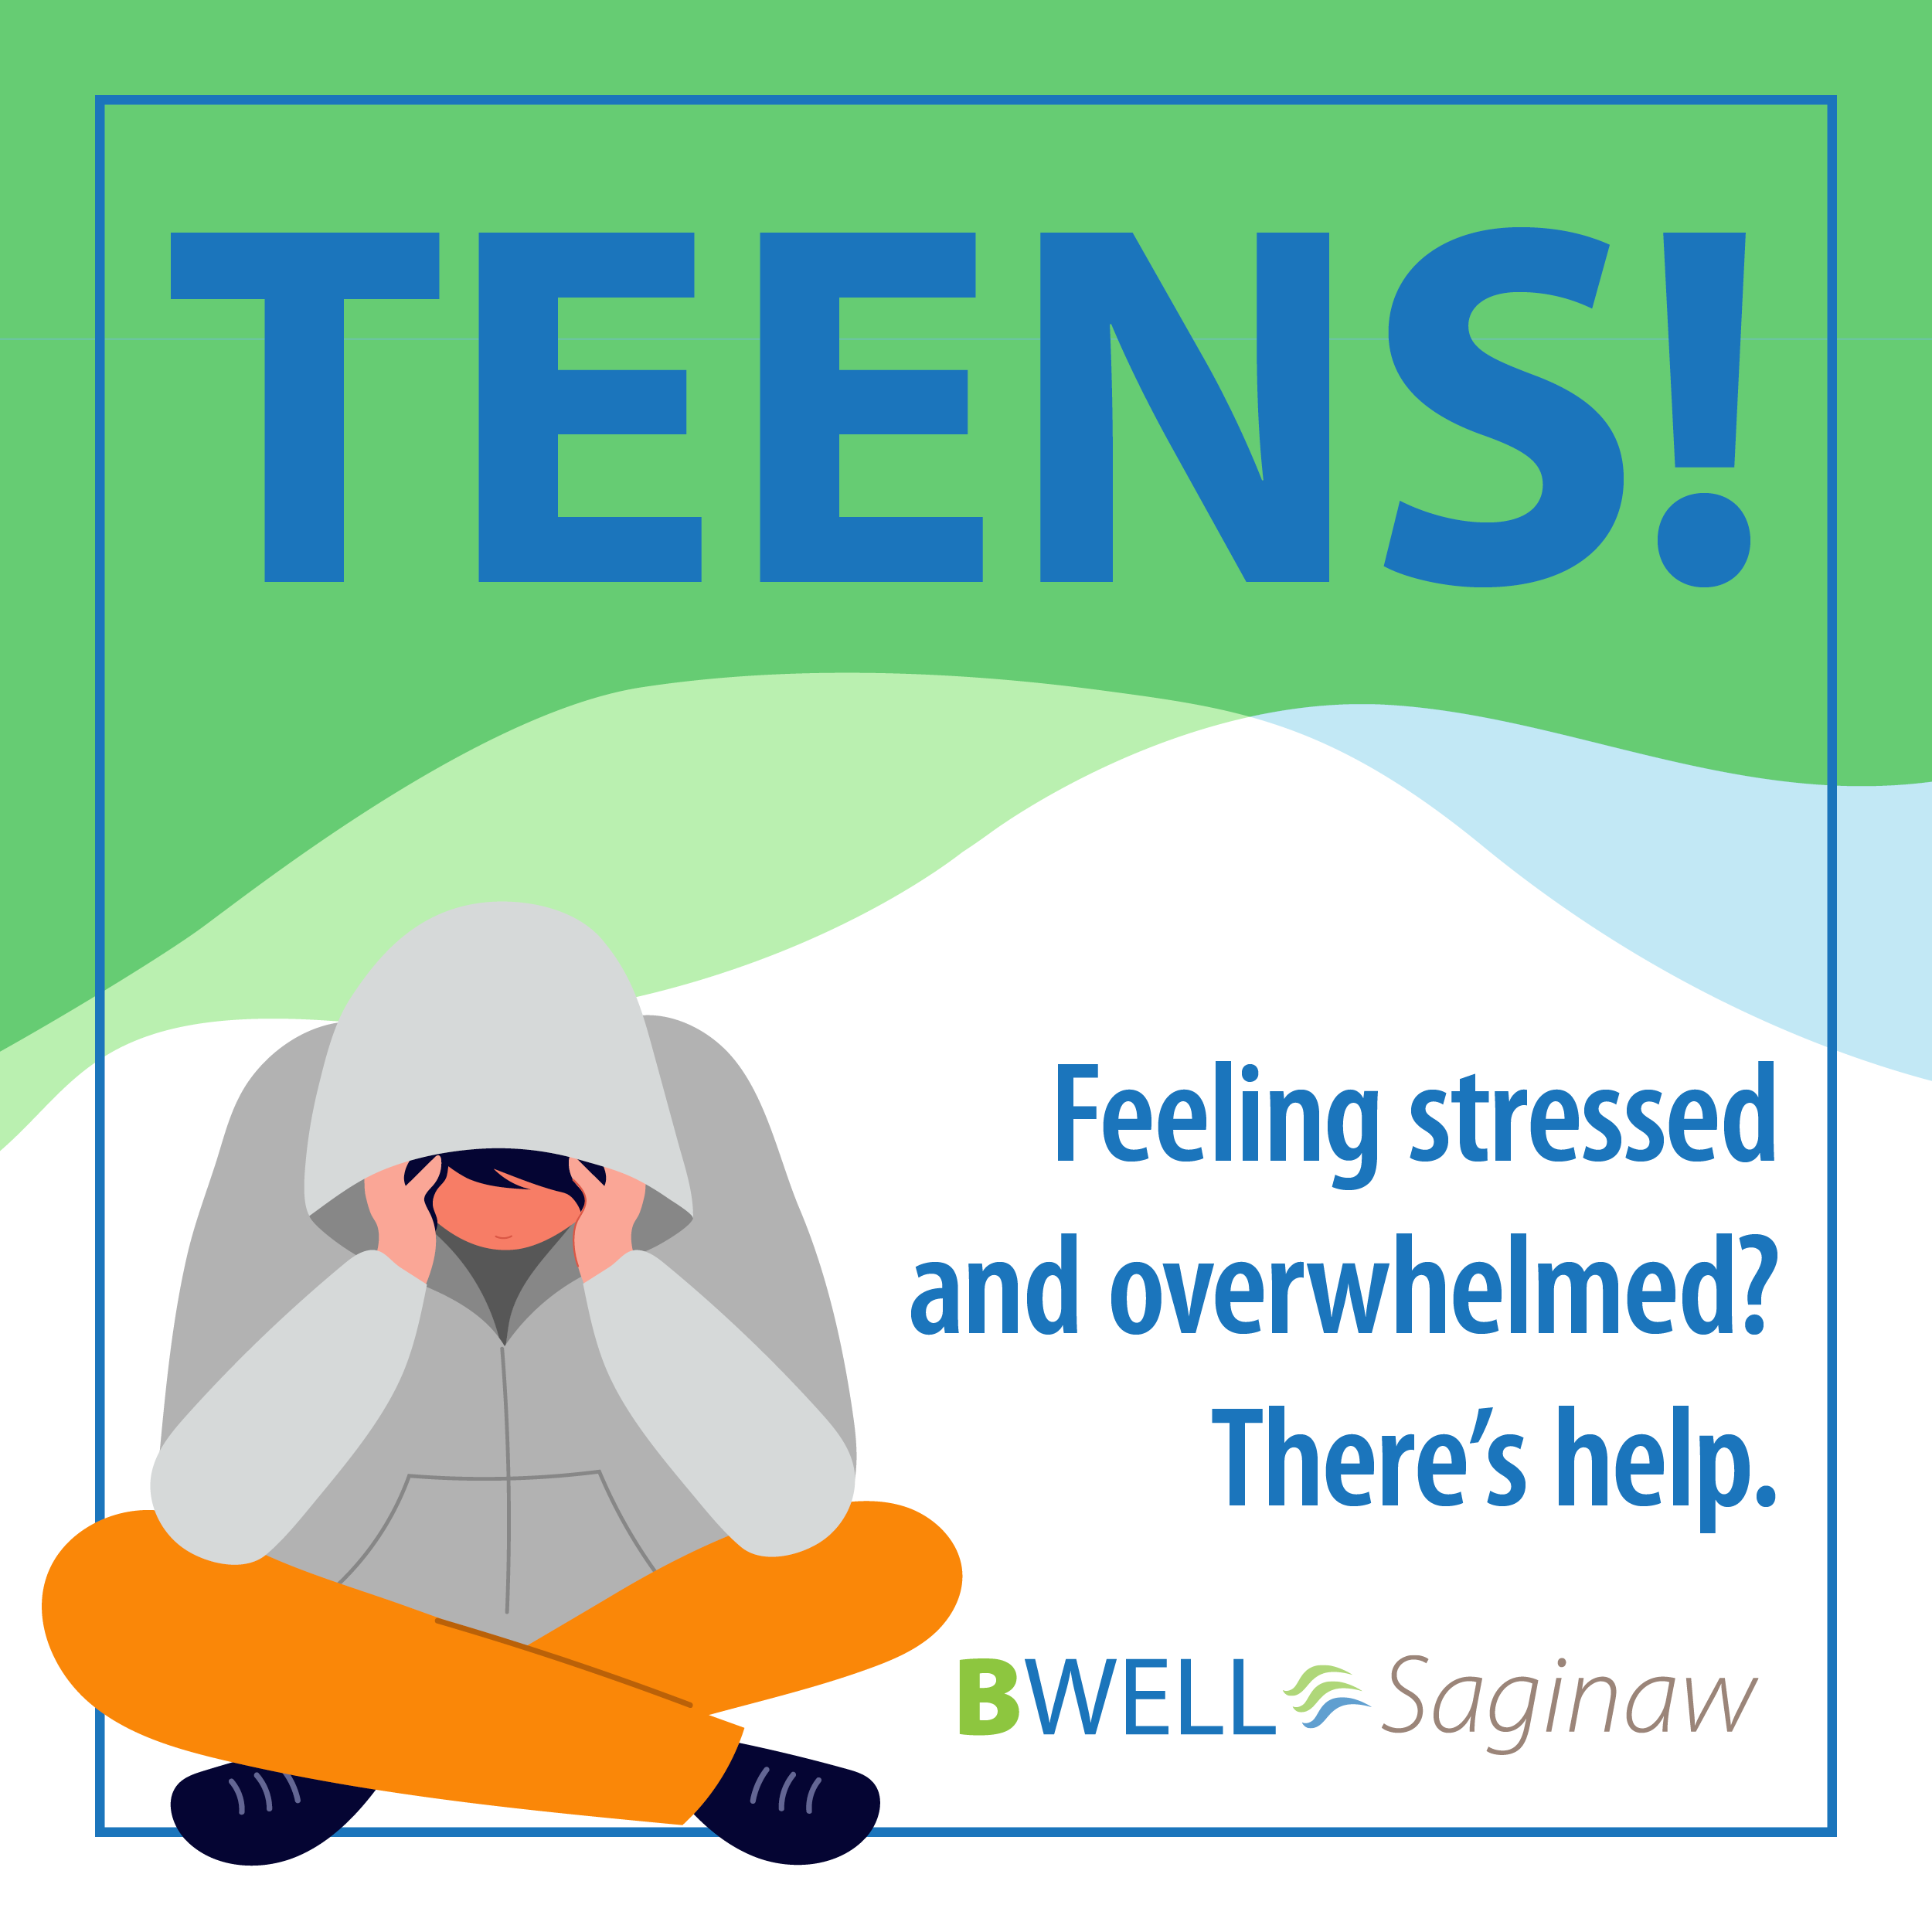 #1: Teens: Feeling stressed and overwhelmed?